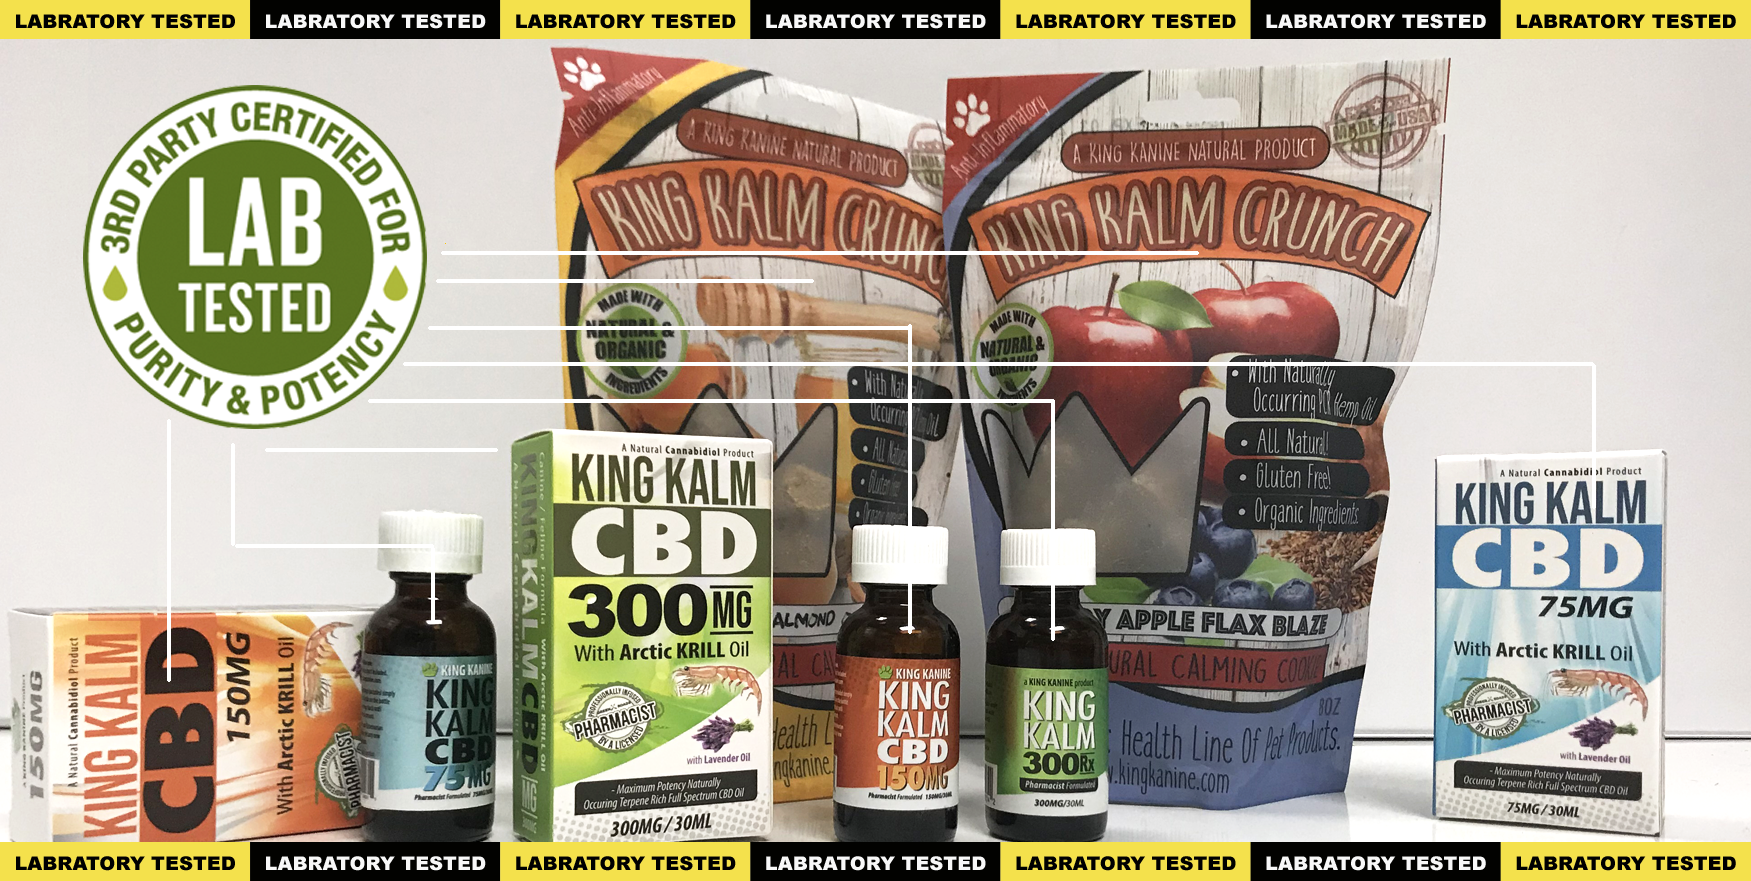 KING KALM CBD has certified ISO Lab full panel testing and has passed with flying colors